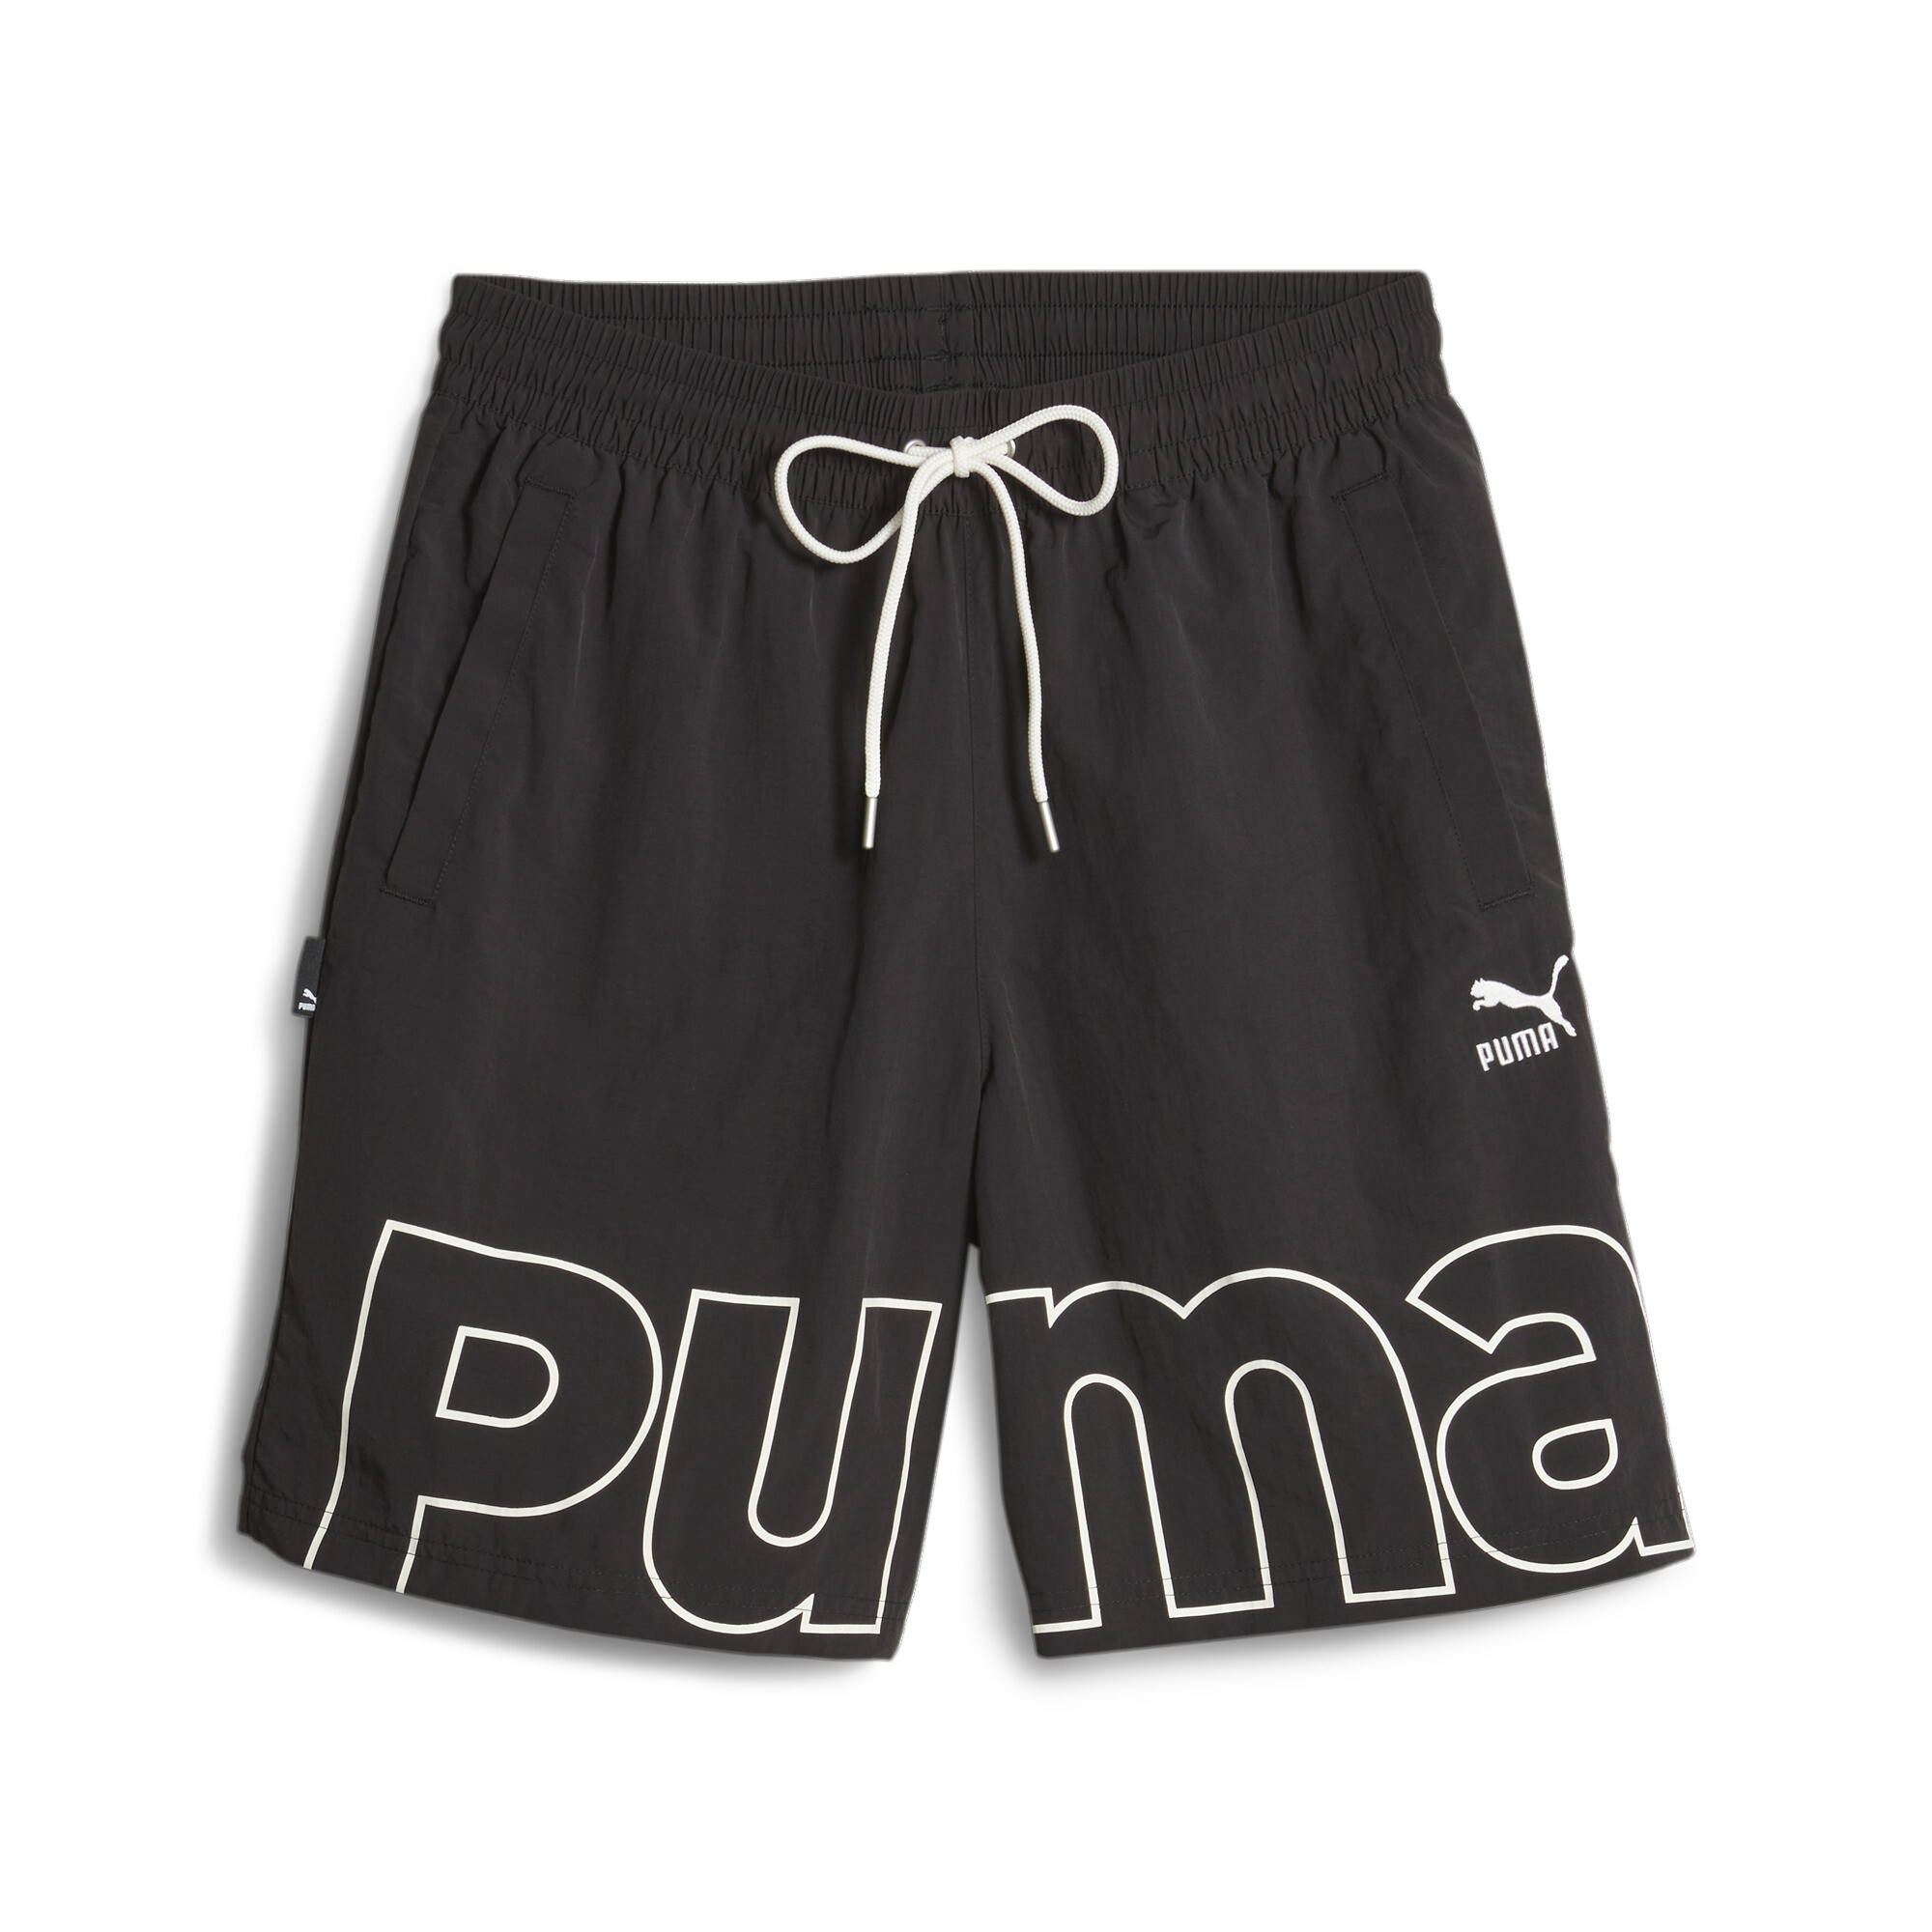 Men's PUMA TEAM Relaxed Shorts In Black, Size Large